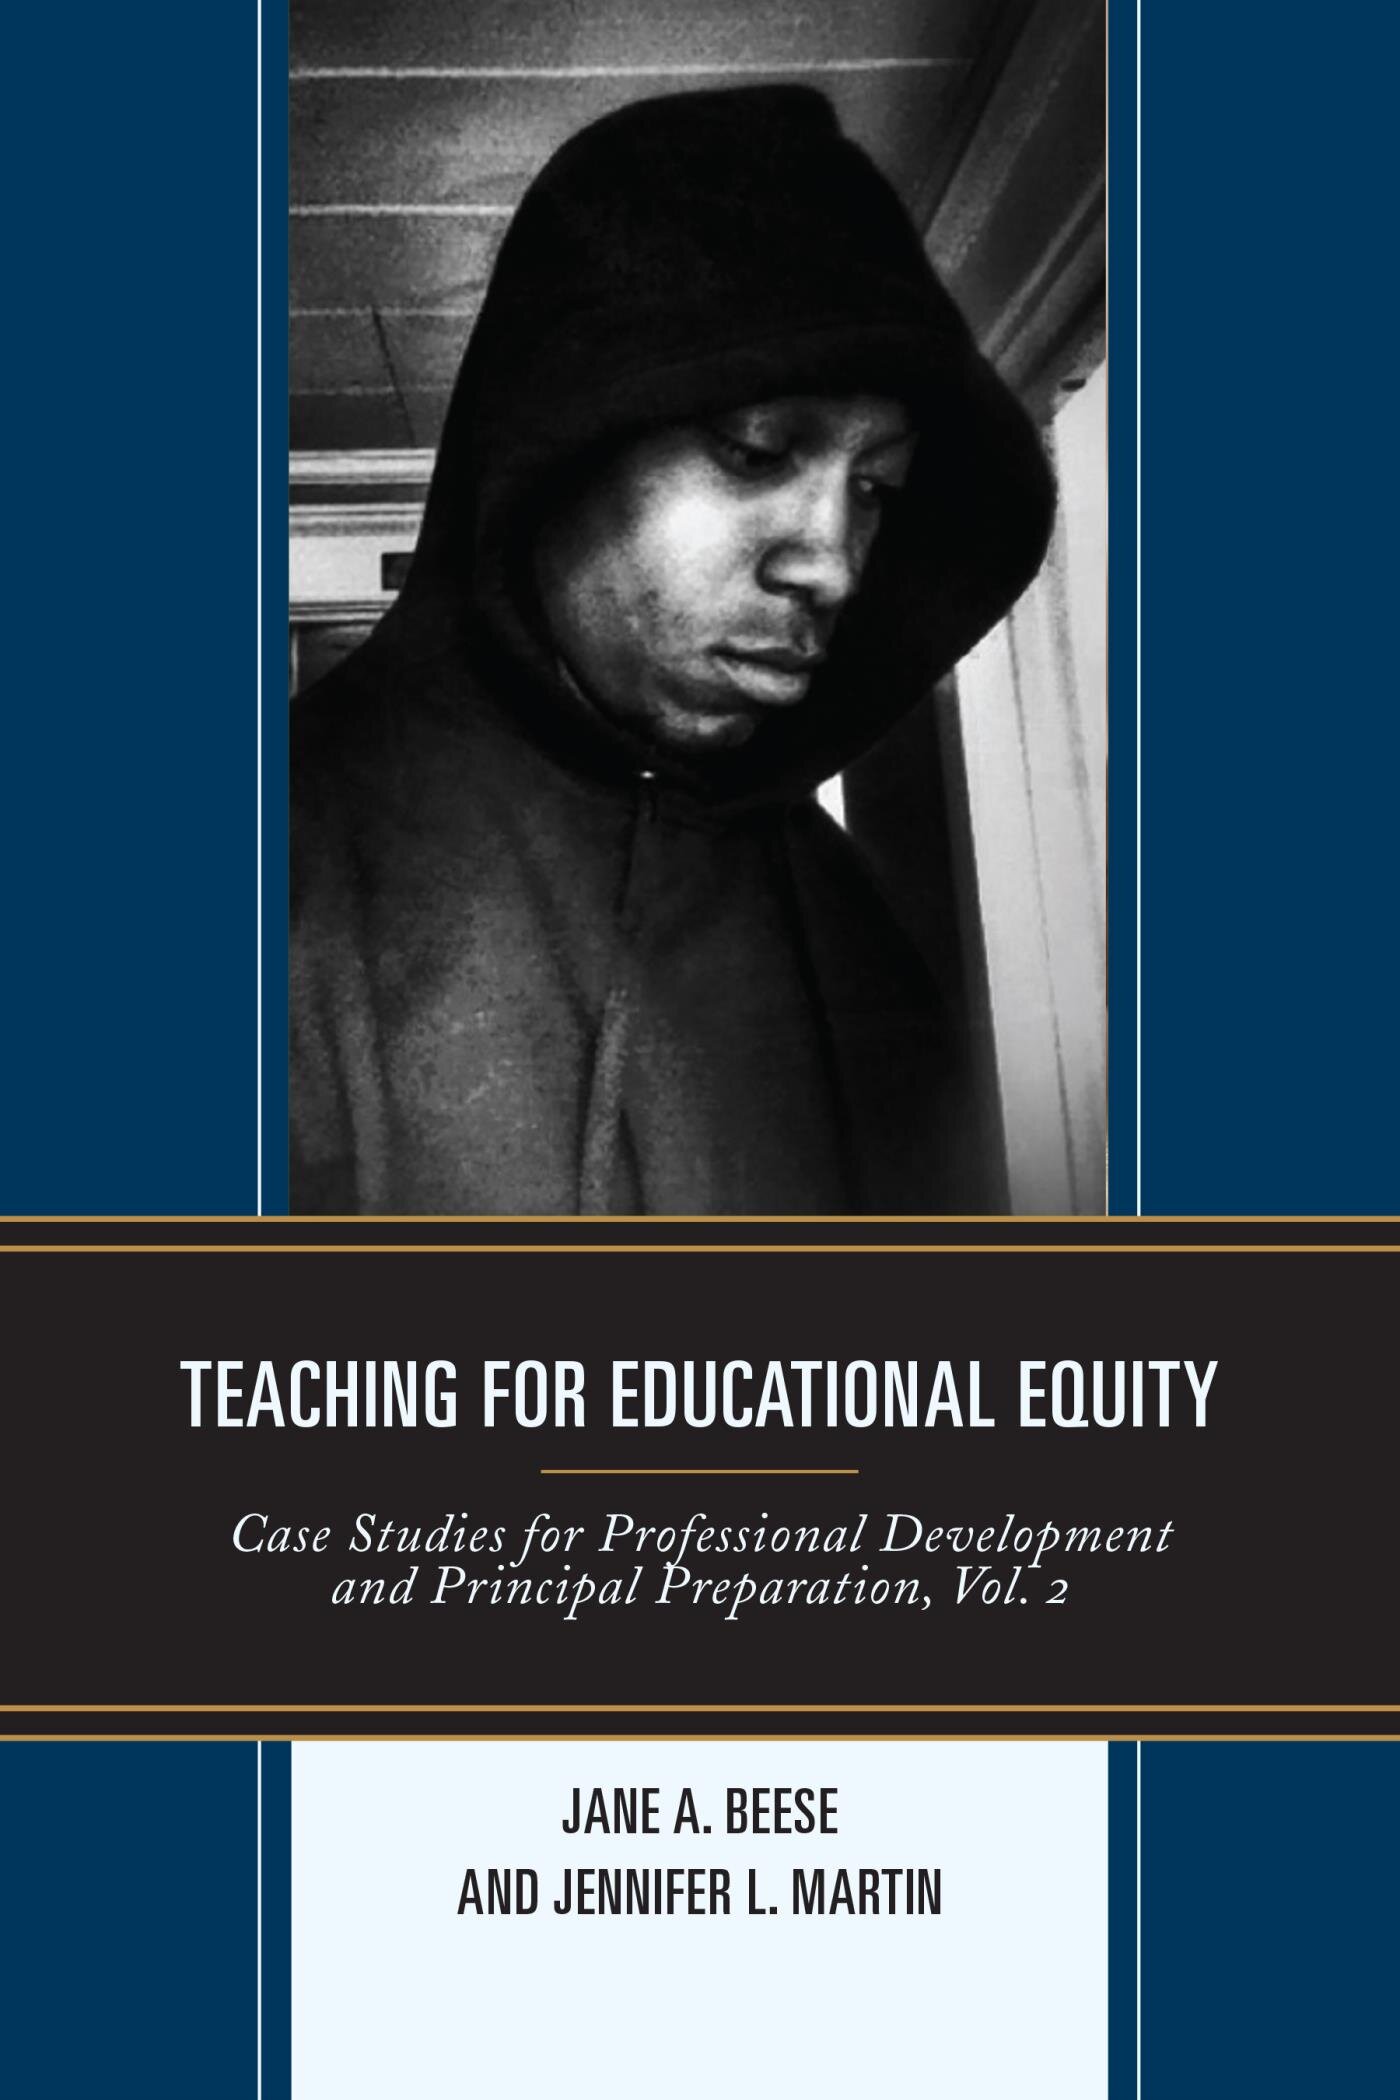 for　and　Teaching　for　Principal　Studies　Development　Ebooks　Educational　Case　Equity:　Professional　Preparation　Faithlife